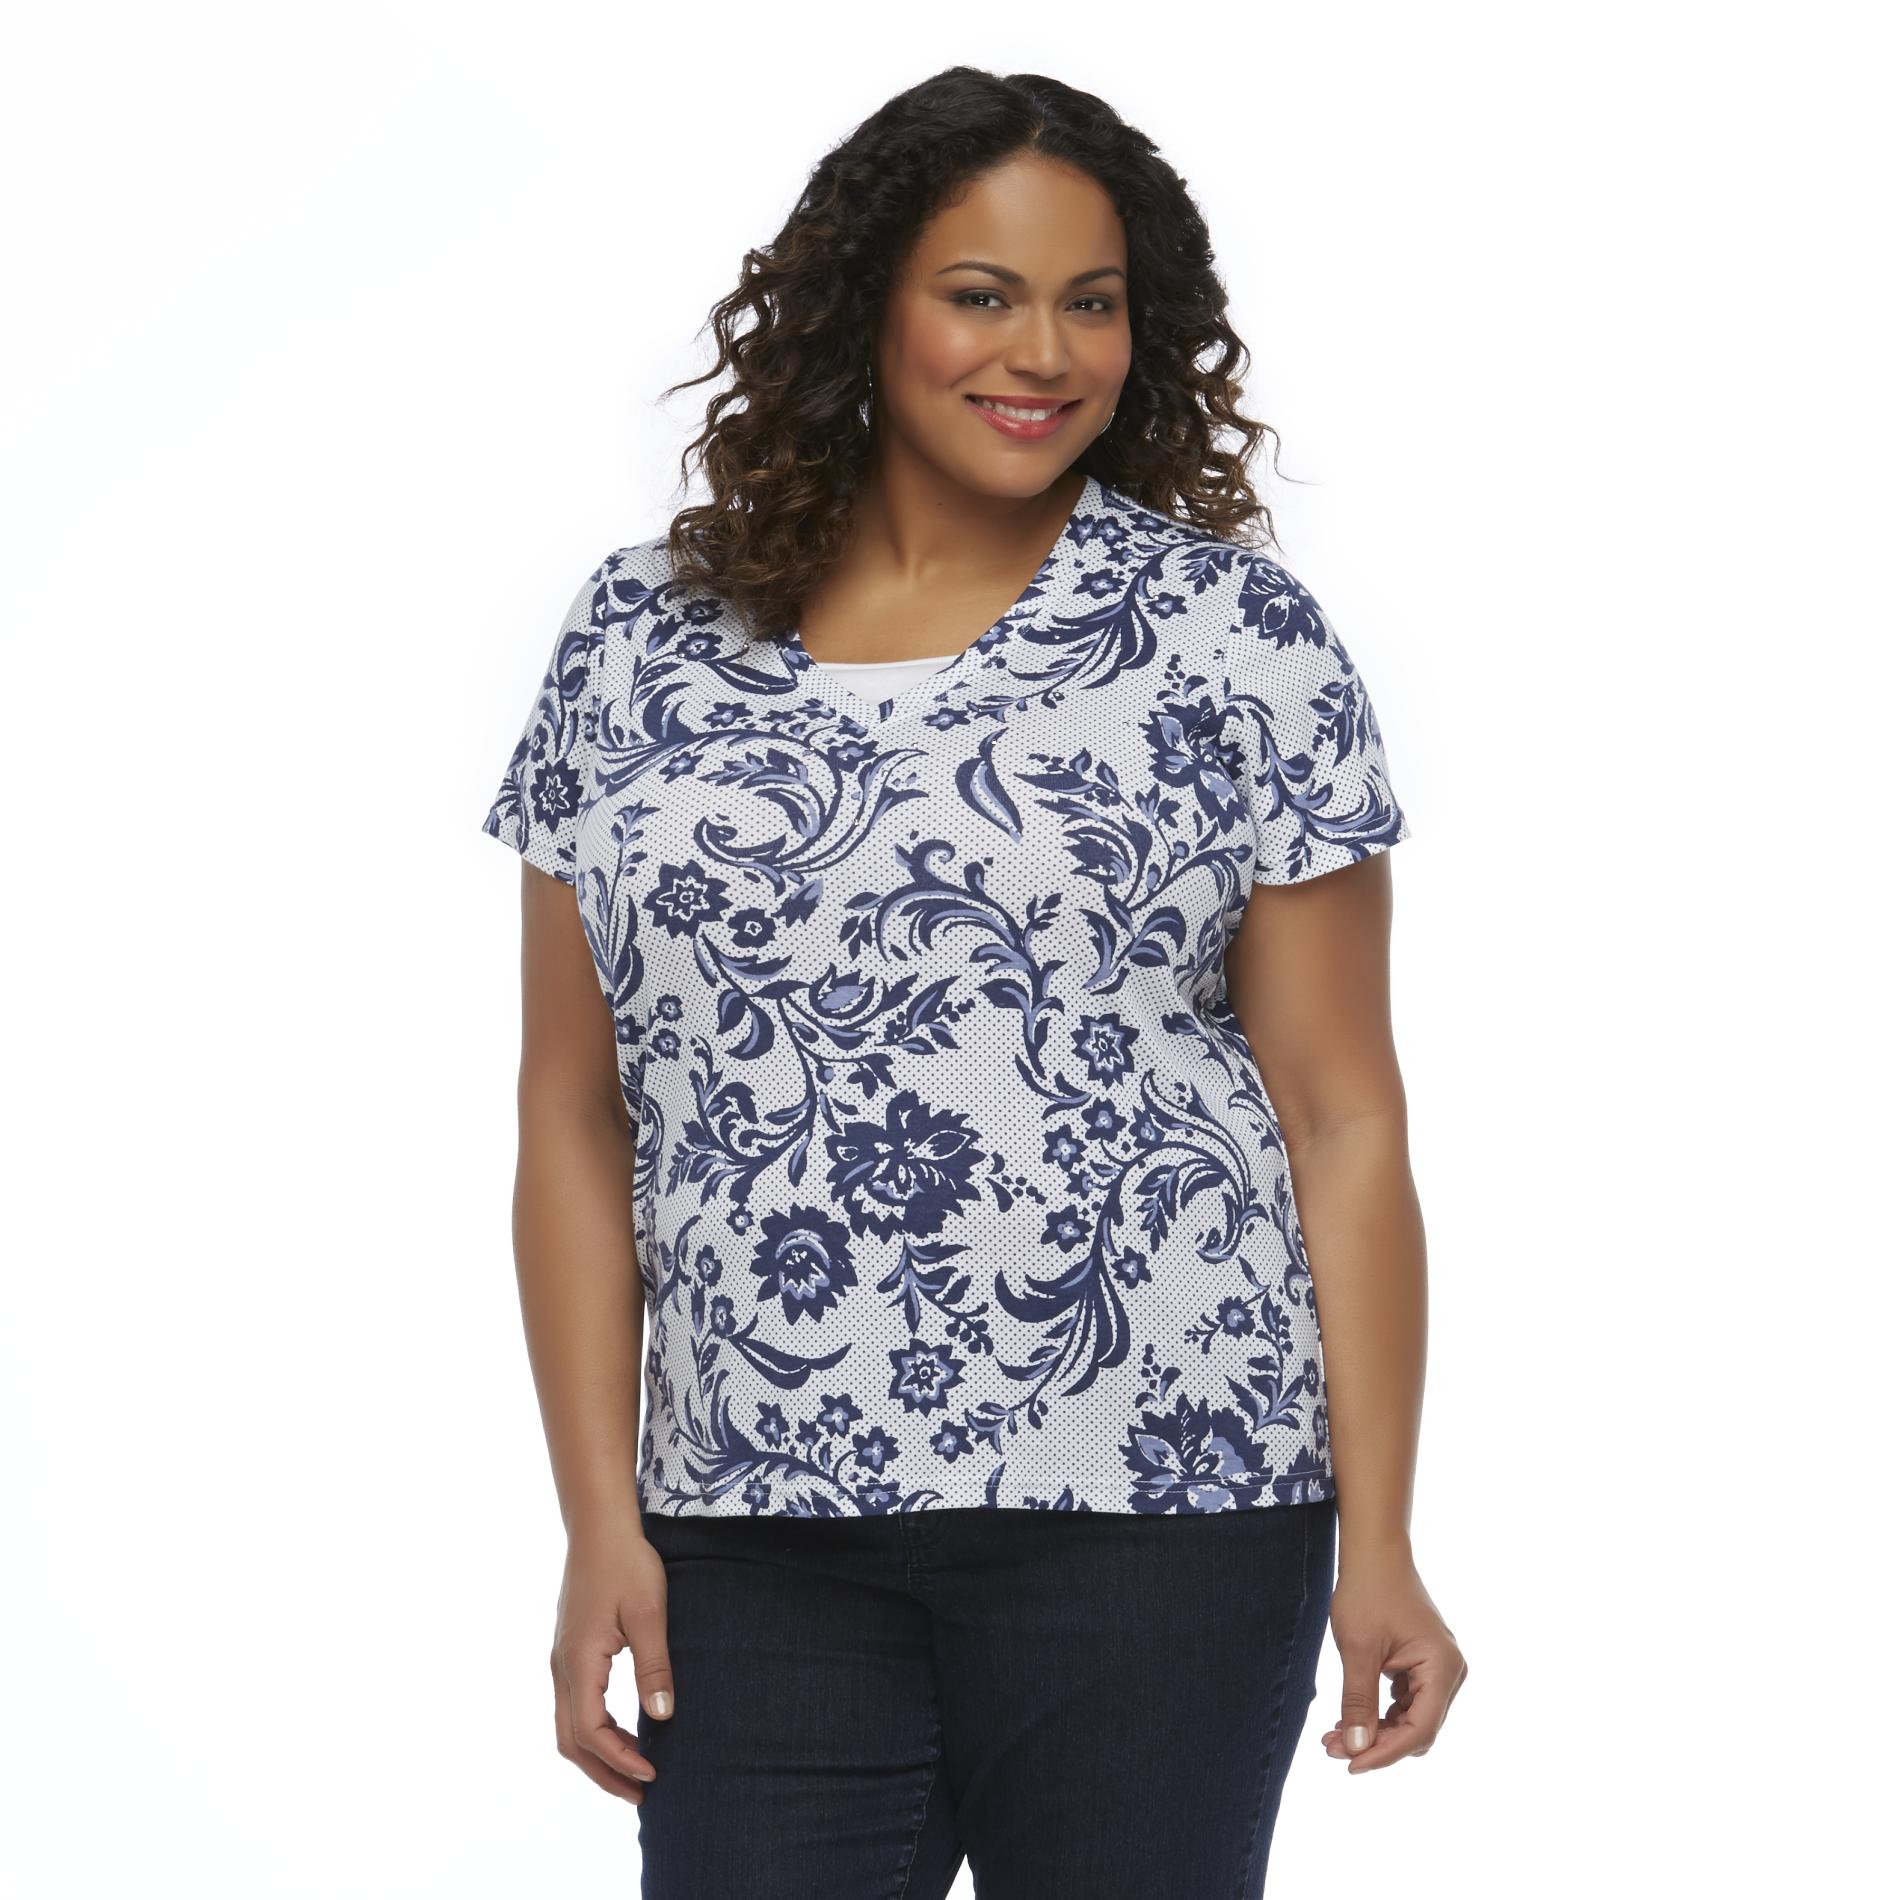 Basic Editions Women's Plus Layered-Look Embellished Top - Floral